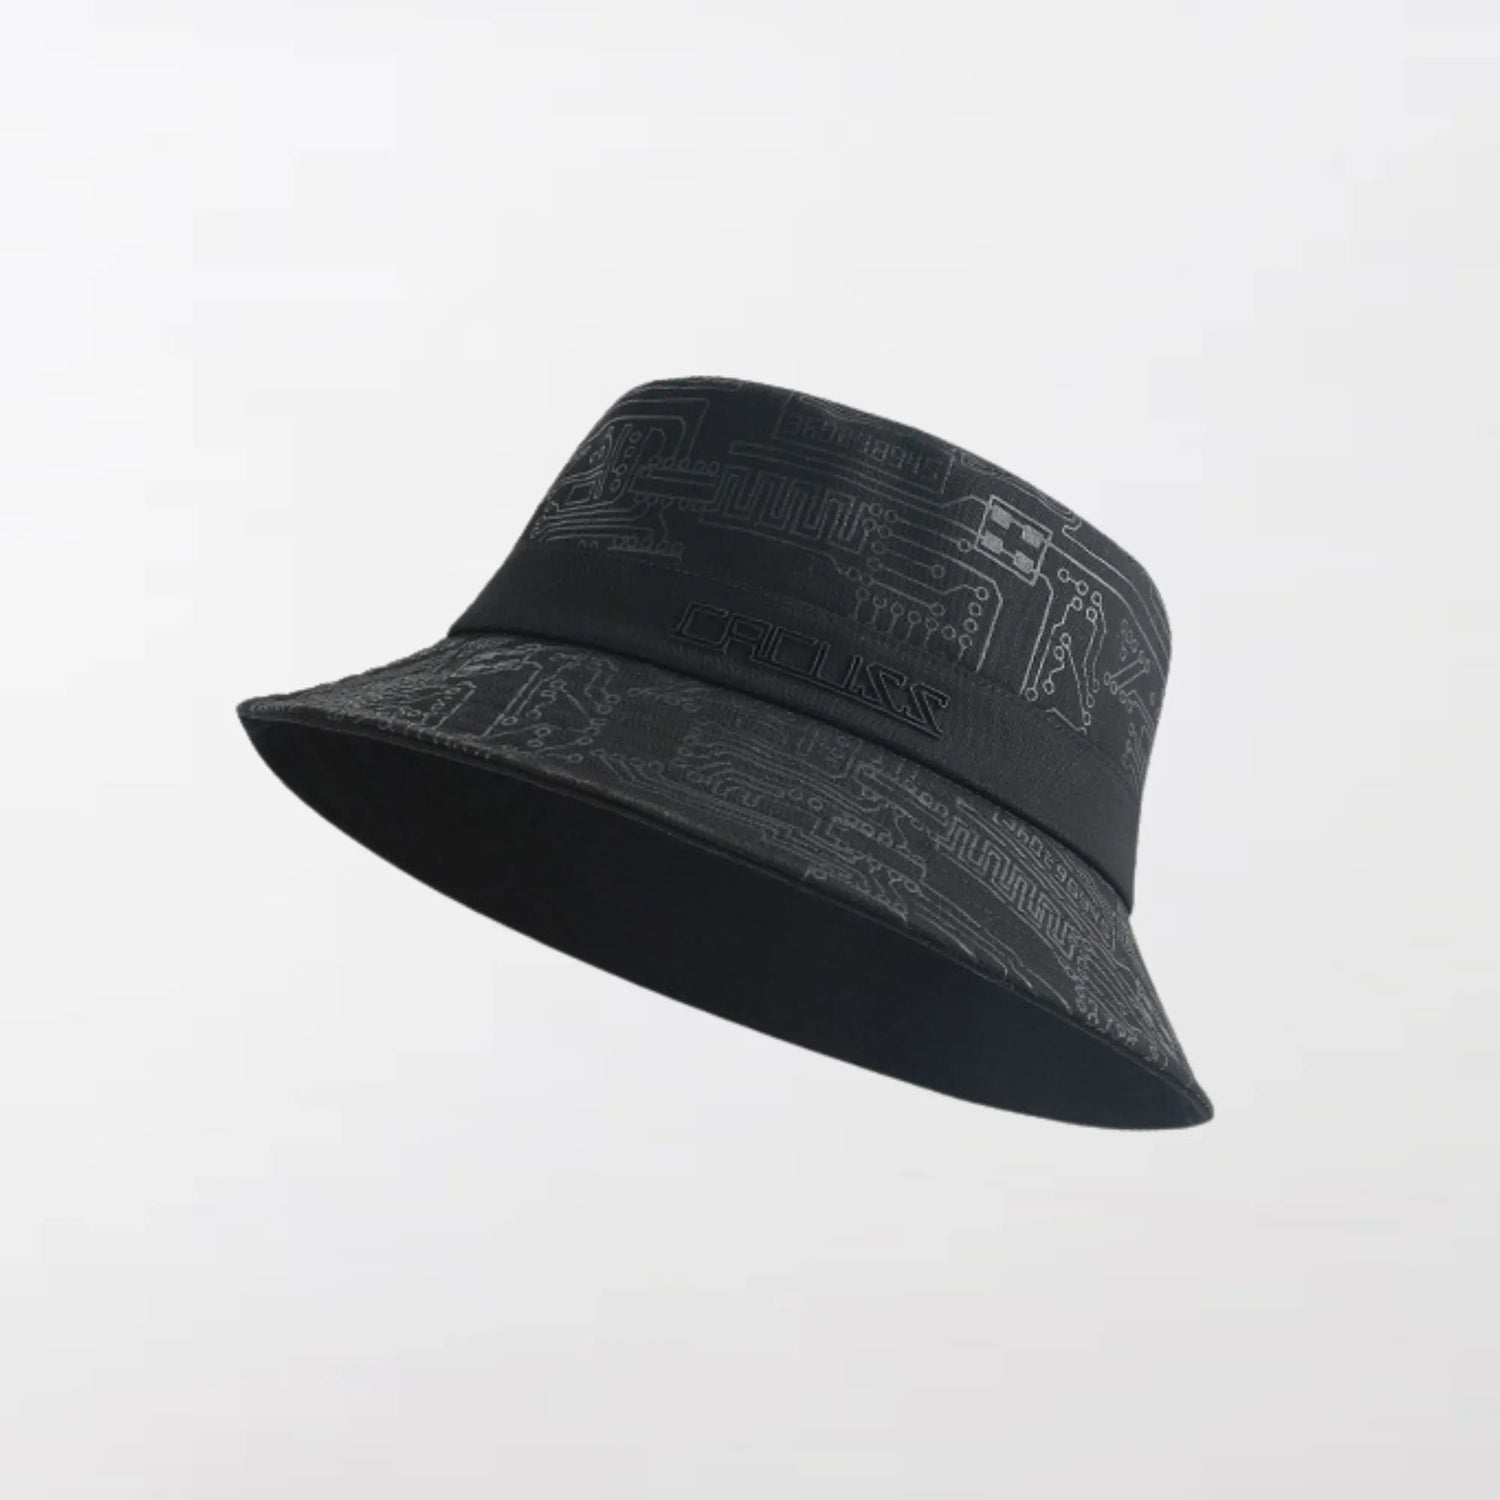 A black Cyberpunk Bucket Hat with a three-dimensional shape, nearly routed brim - Clotechnow.